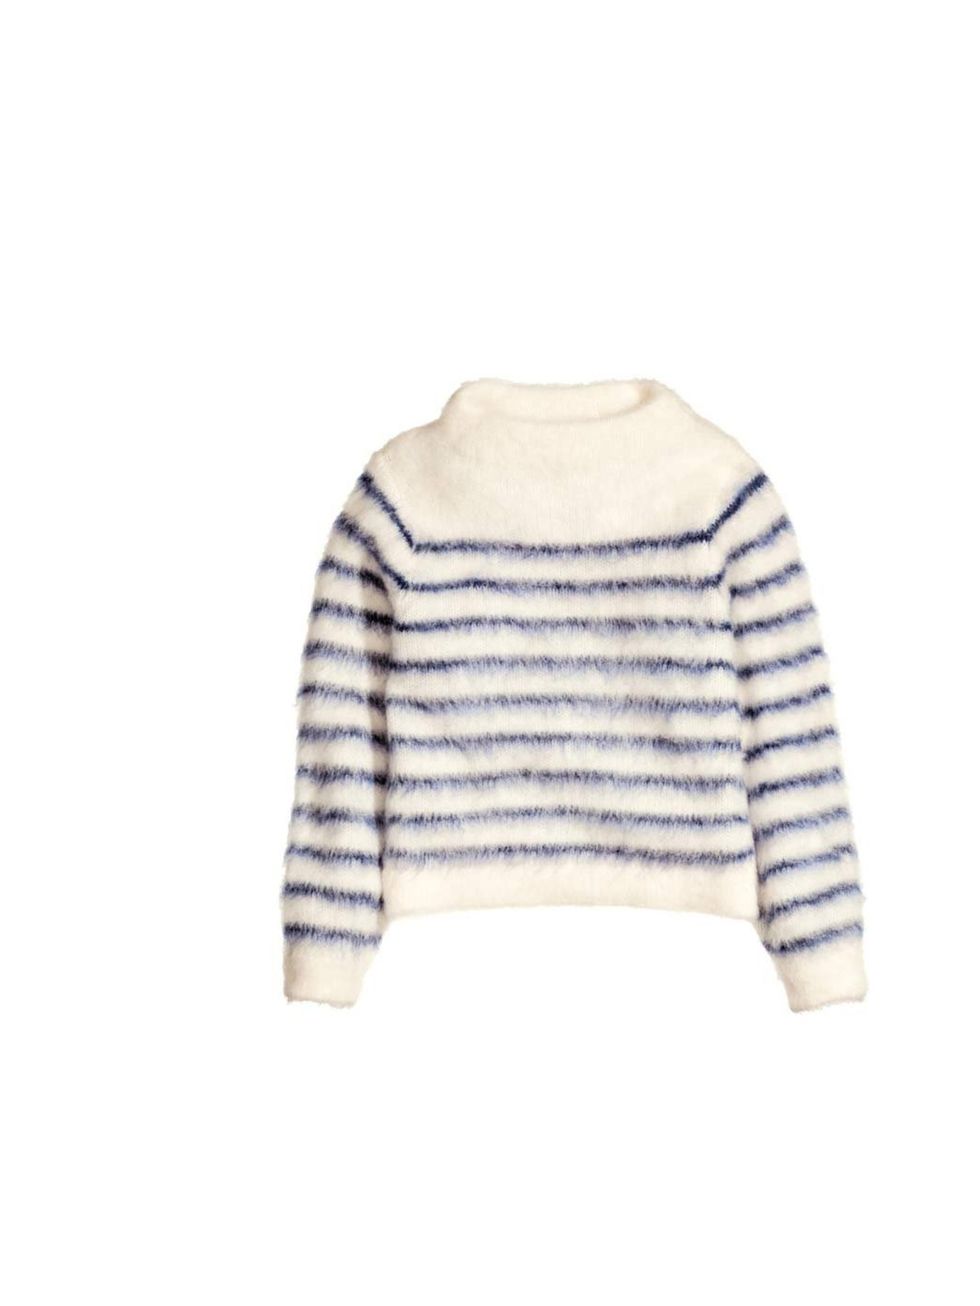 <p>Pair this fluffy breton knit with tailored ankle length trousers and ballet flats for a simple, elegant look.</p><p><a href="http://www.hm.com/gb/product/22942?article=22942-A">H&M</a> jumper, £34.99</p>